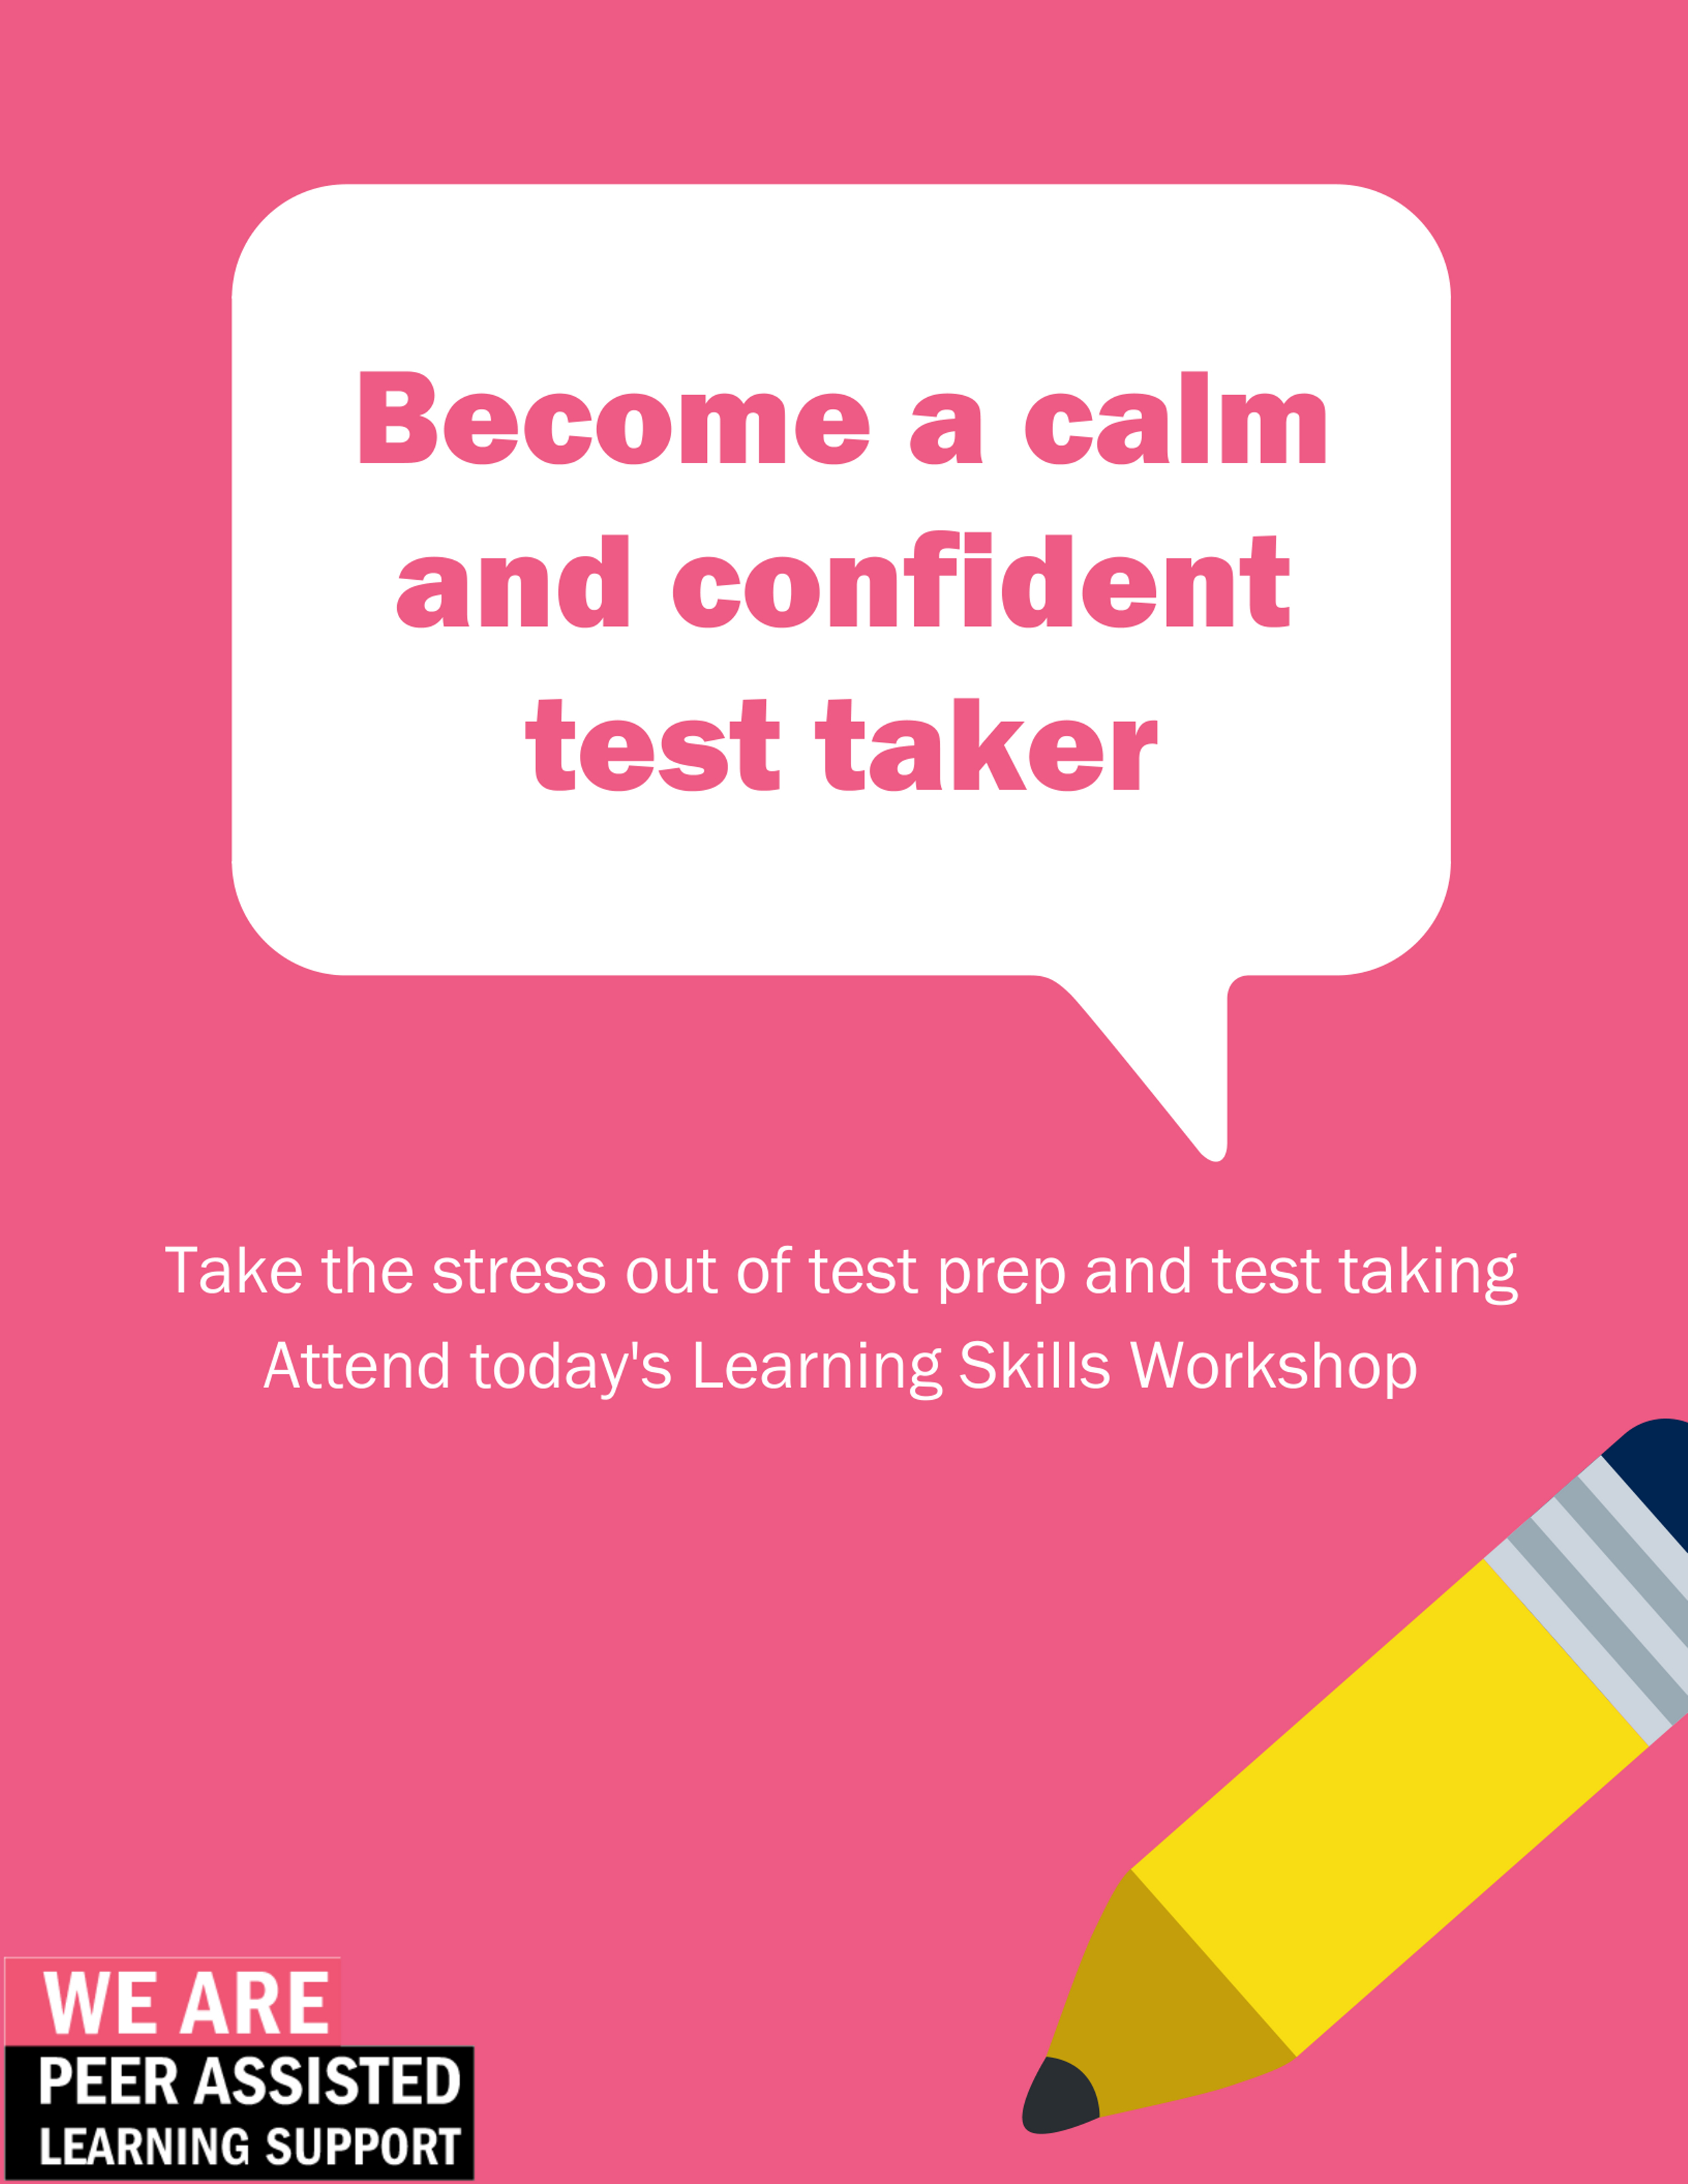 Cartoon image of pencil on a pink background with the text "Become a calm and confident test taker"